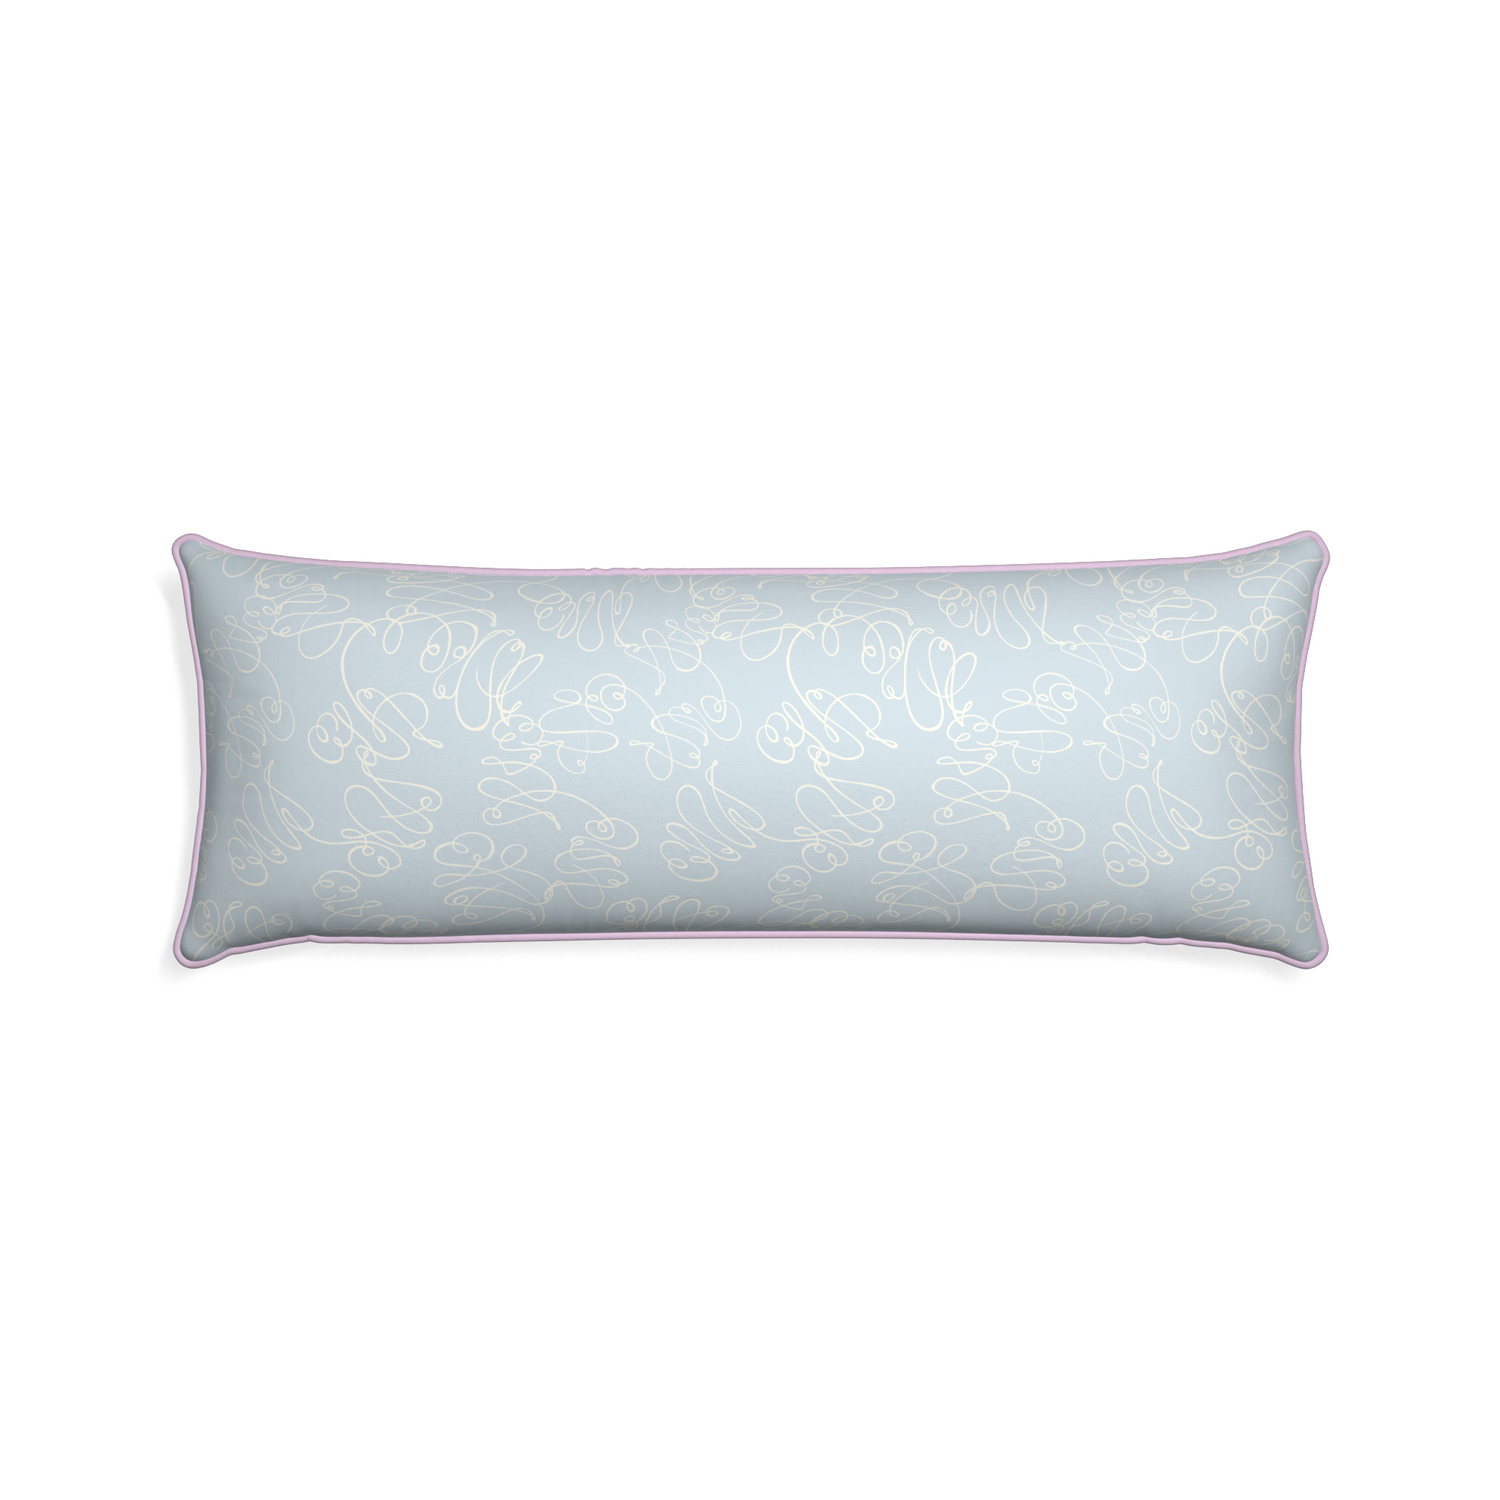 Xl-lumbar mirabella custom powder blue abstractpillow with l piping on white background